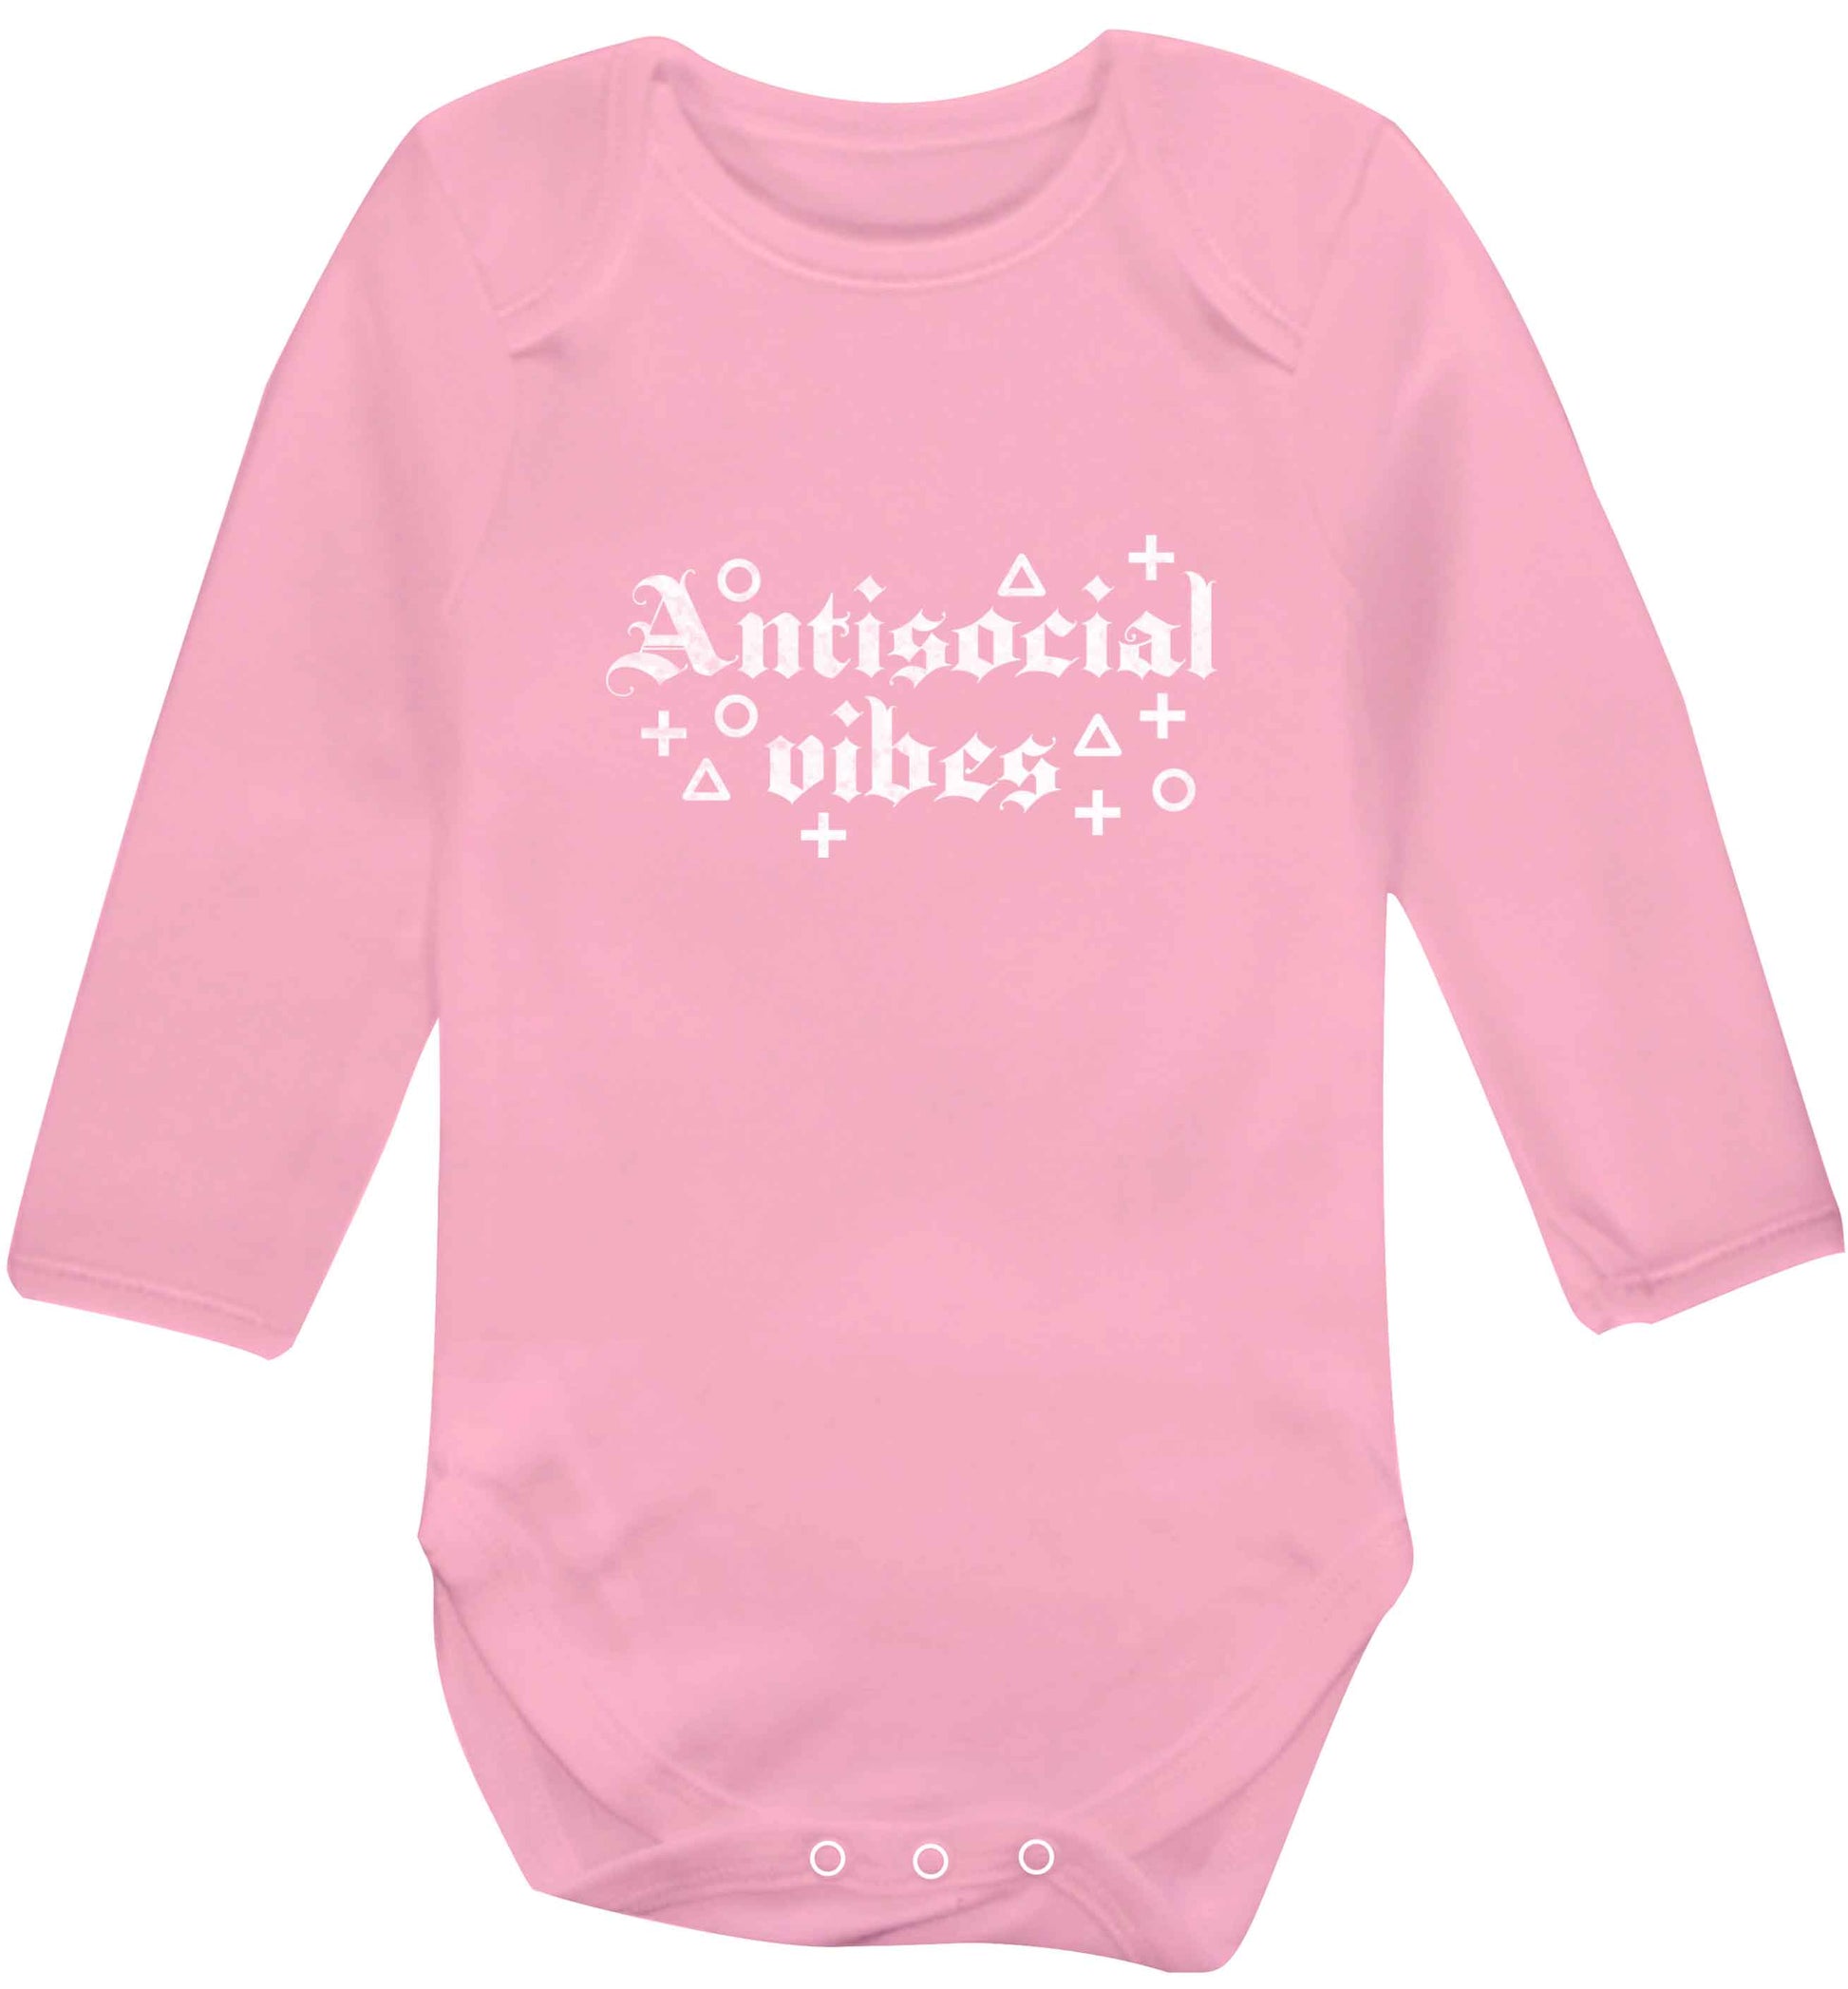 Antisocial vibes baby vest long sleeved pale pink 6-12 months